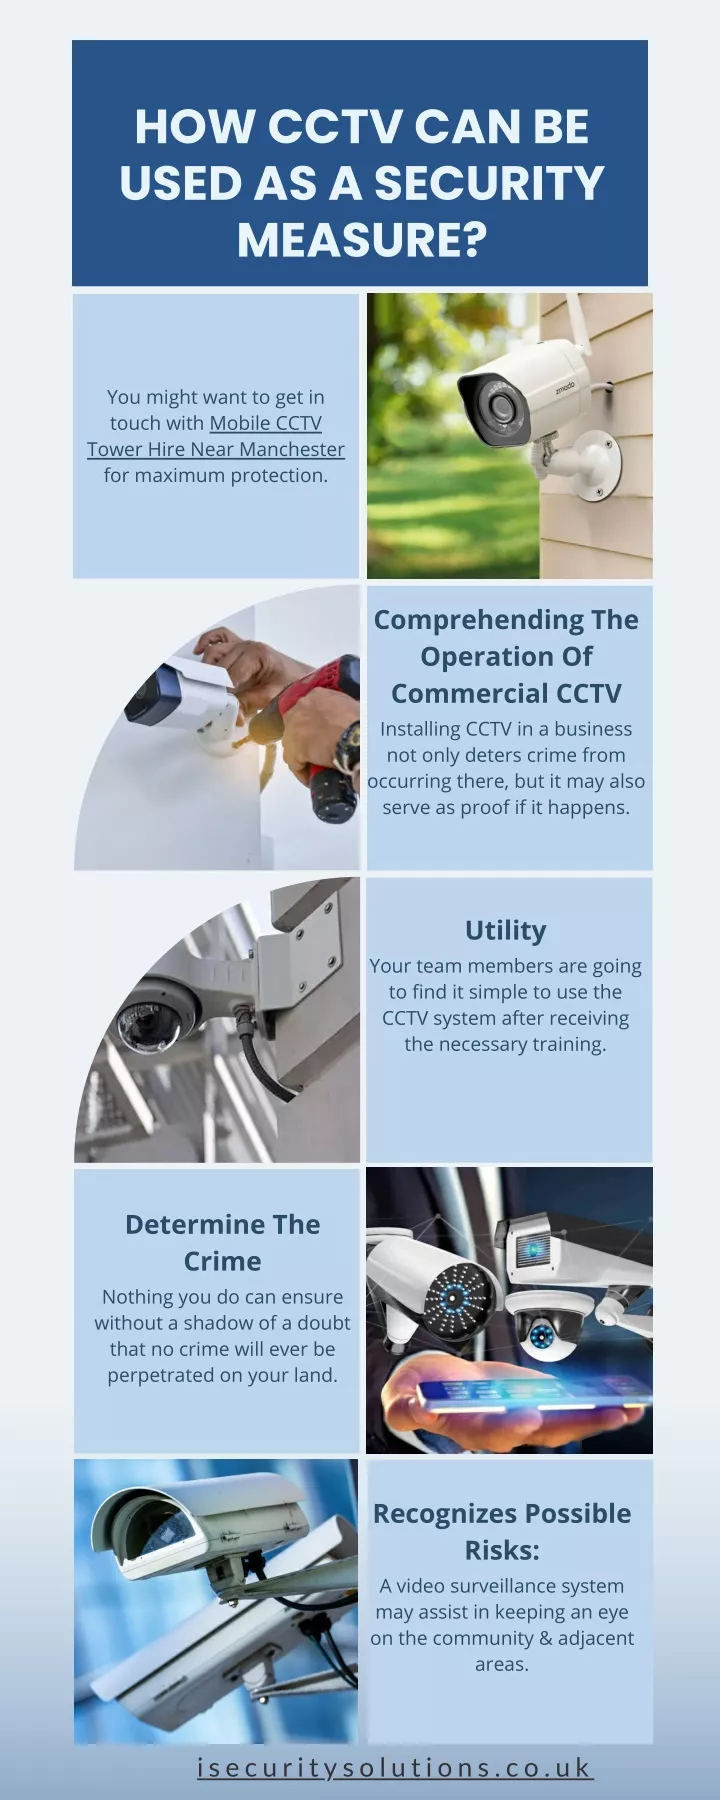 how cctv can be used as a security measure